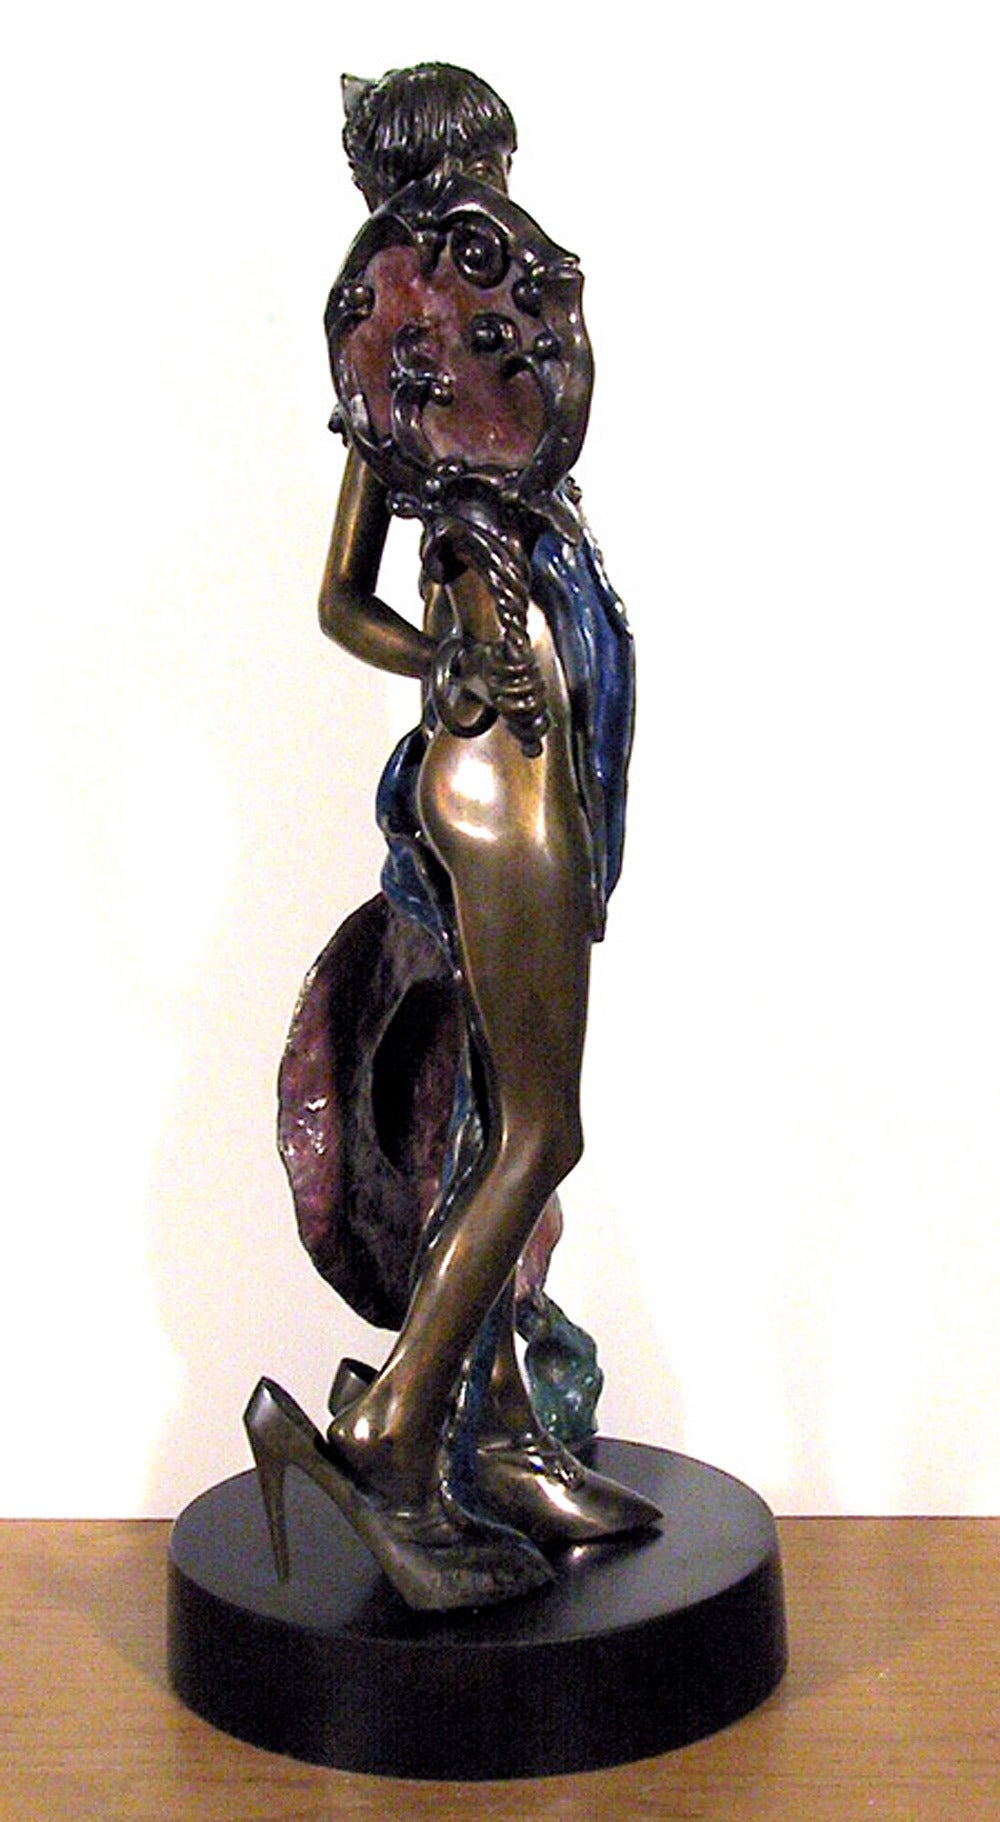 Artist: Richard Shiloh, Polish/Israeli (1949 - )
Title: Girl holding a Mirror
Year: Circa 1975
Medium: Bronze with Painted patina, signature inscribed
Edition: 2/24
Paper Size: 19 inches tall 
Itamar Foundry